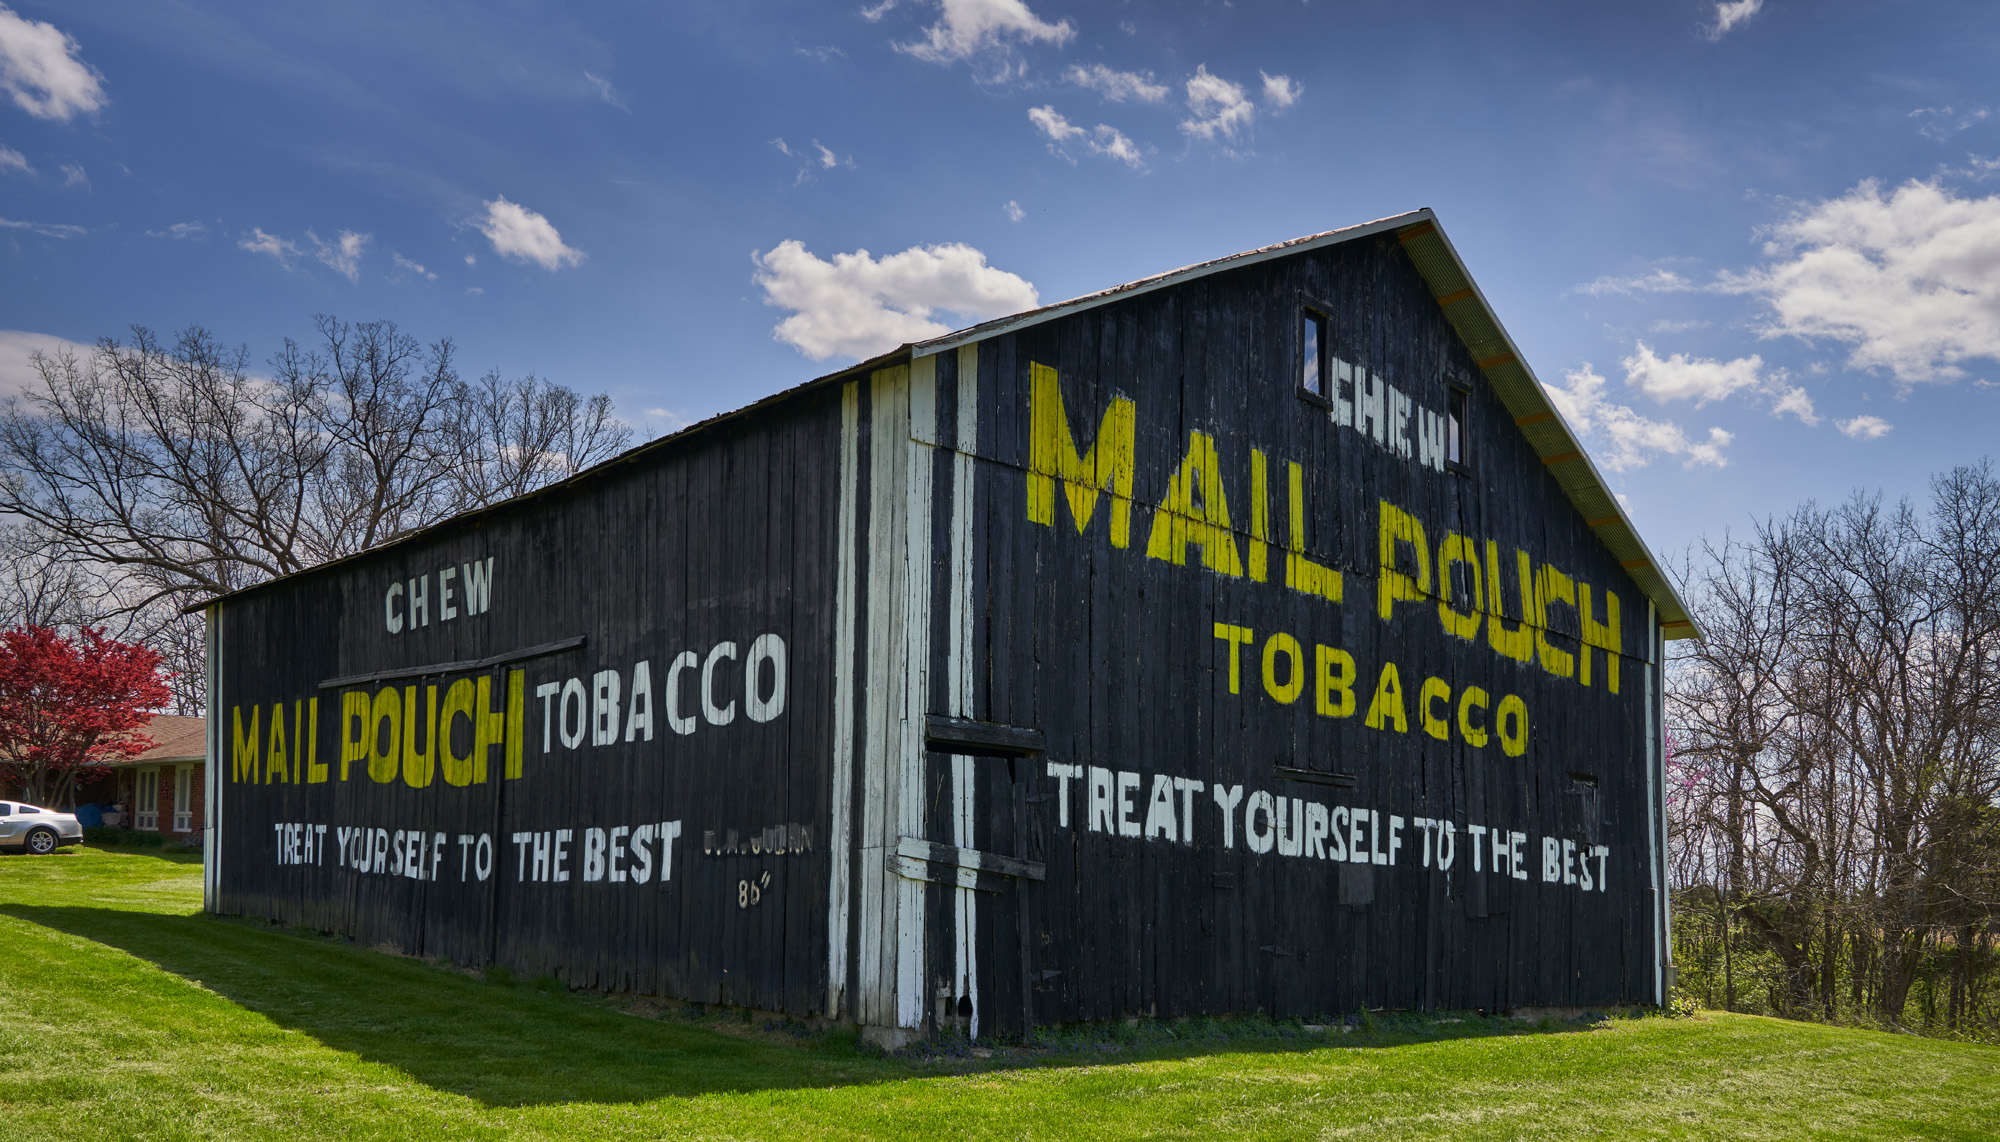 The Mail Pouch Barn